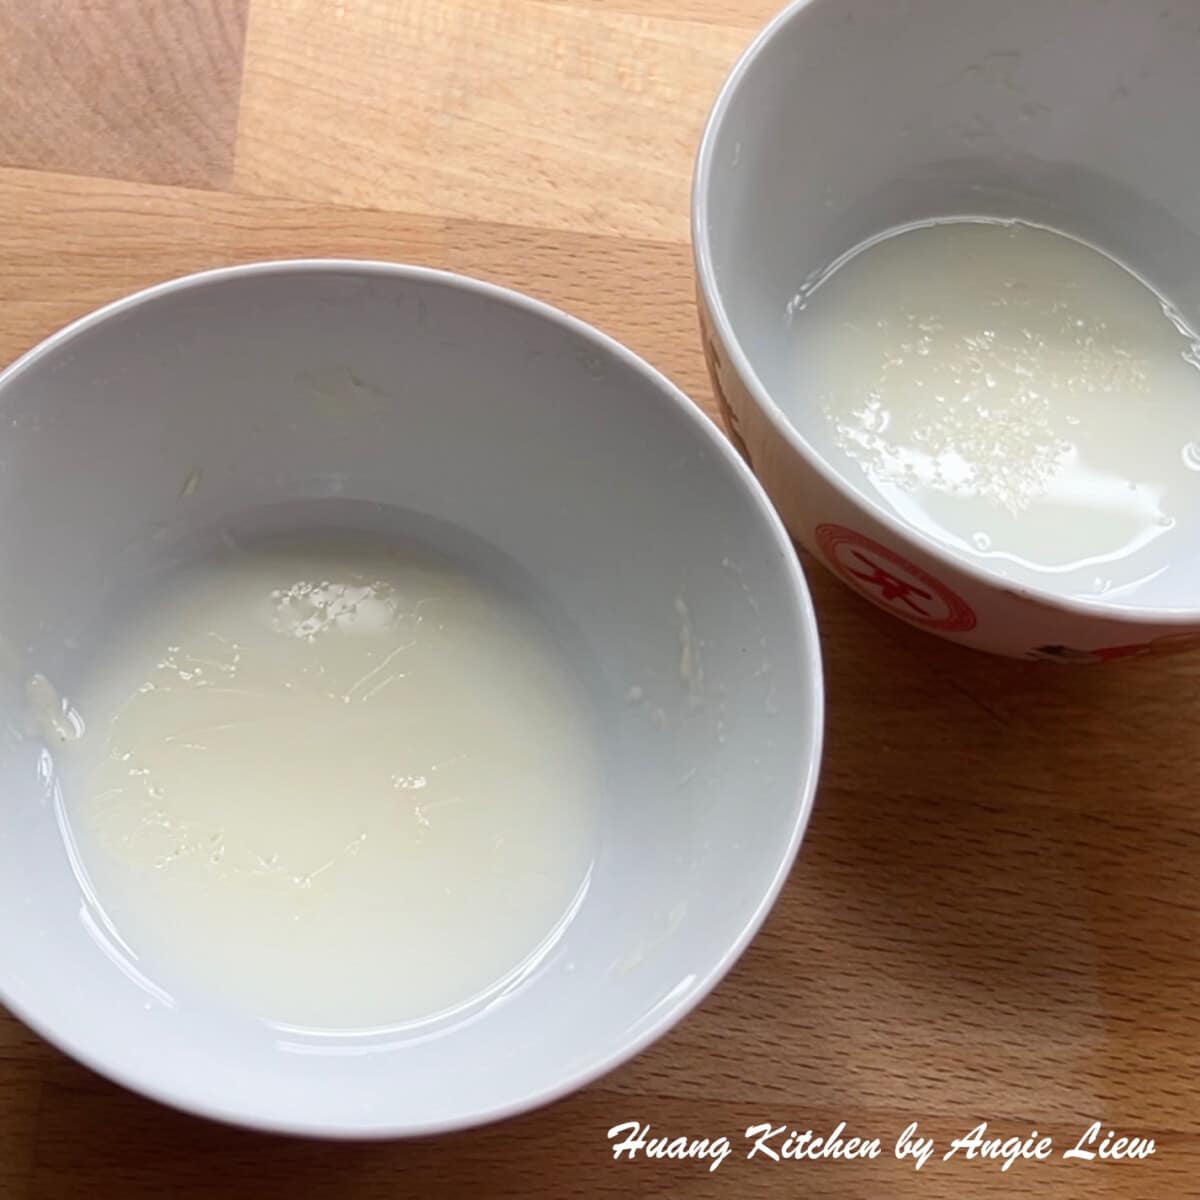 Leave a little milk in the bowl to prevent milk skin from sticking.